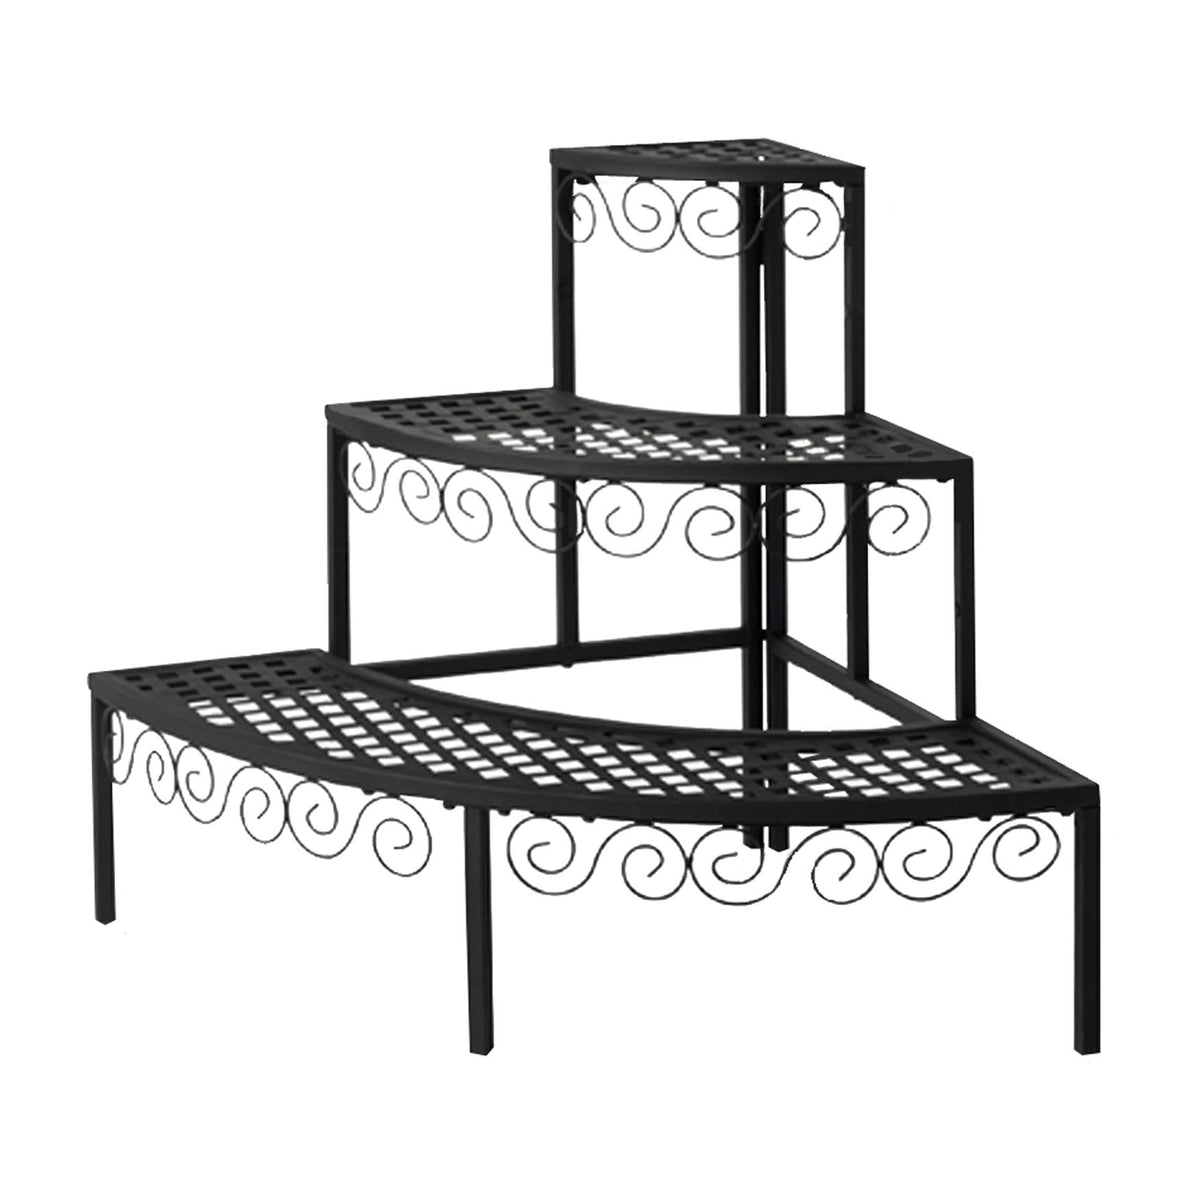 End Cap Plant Stand